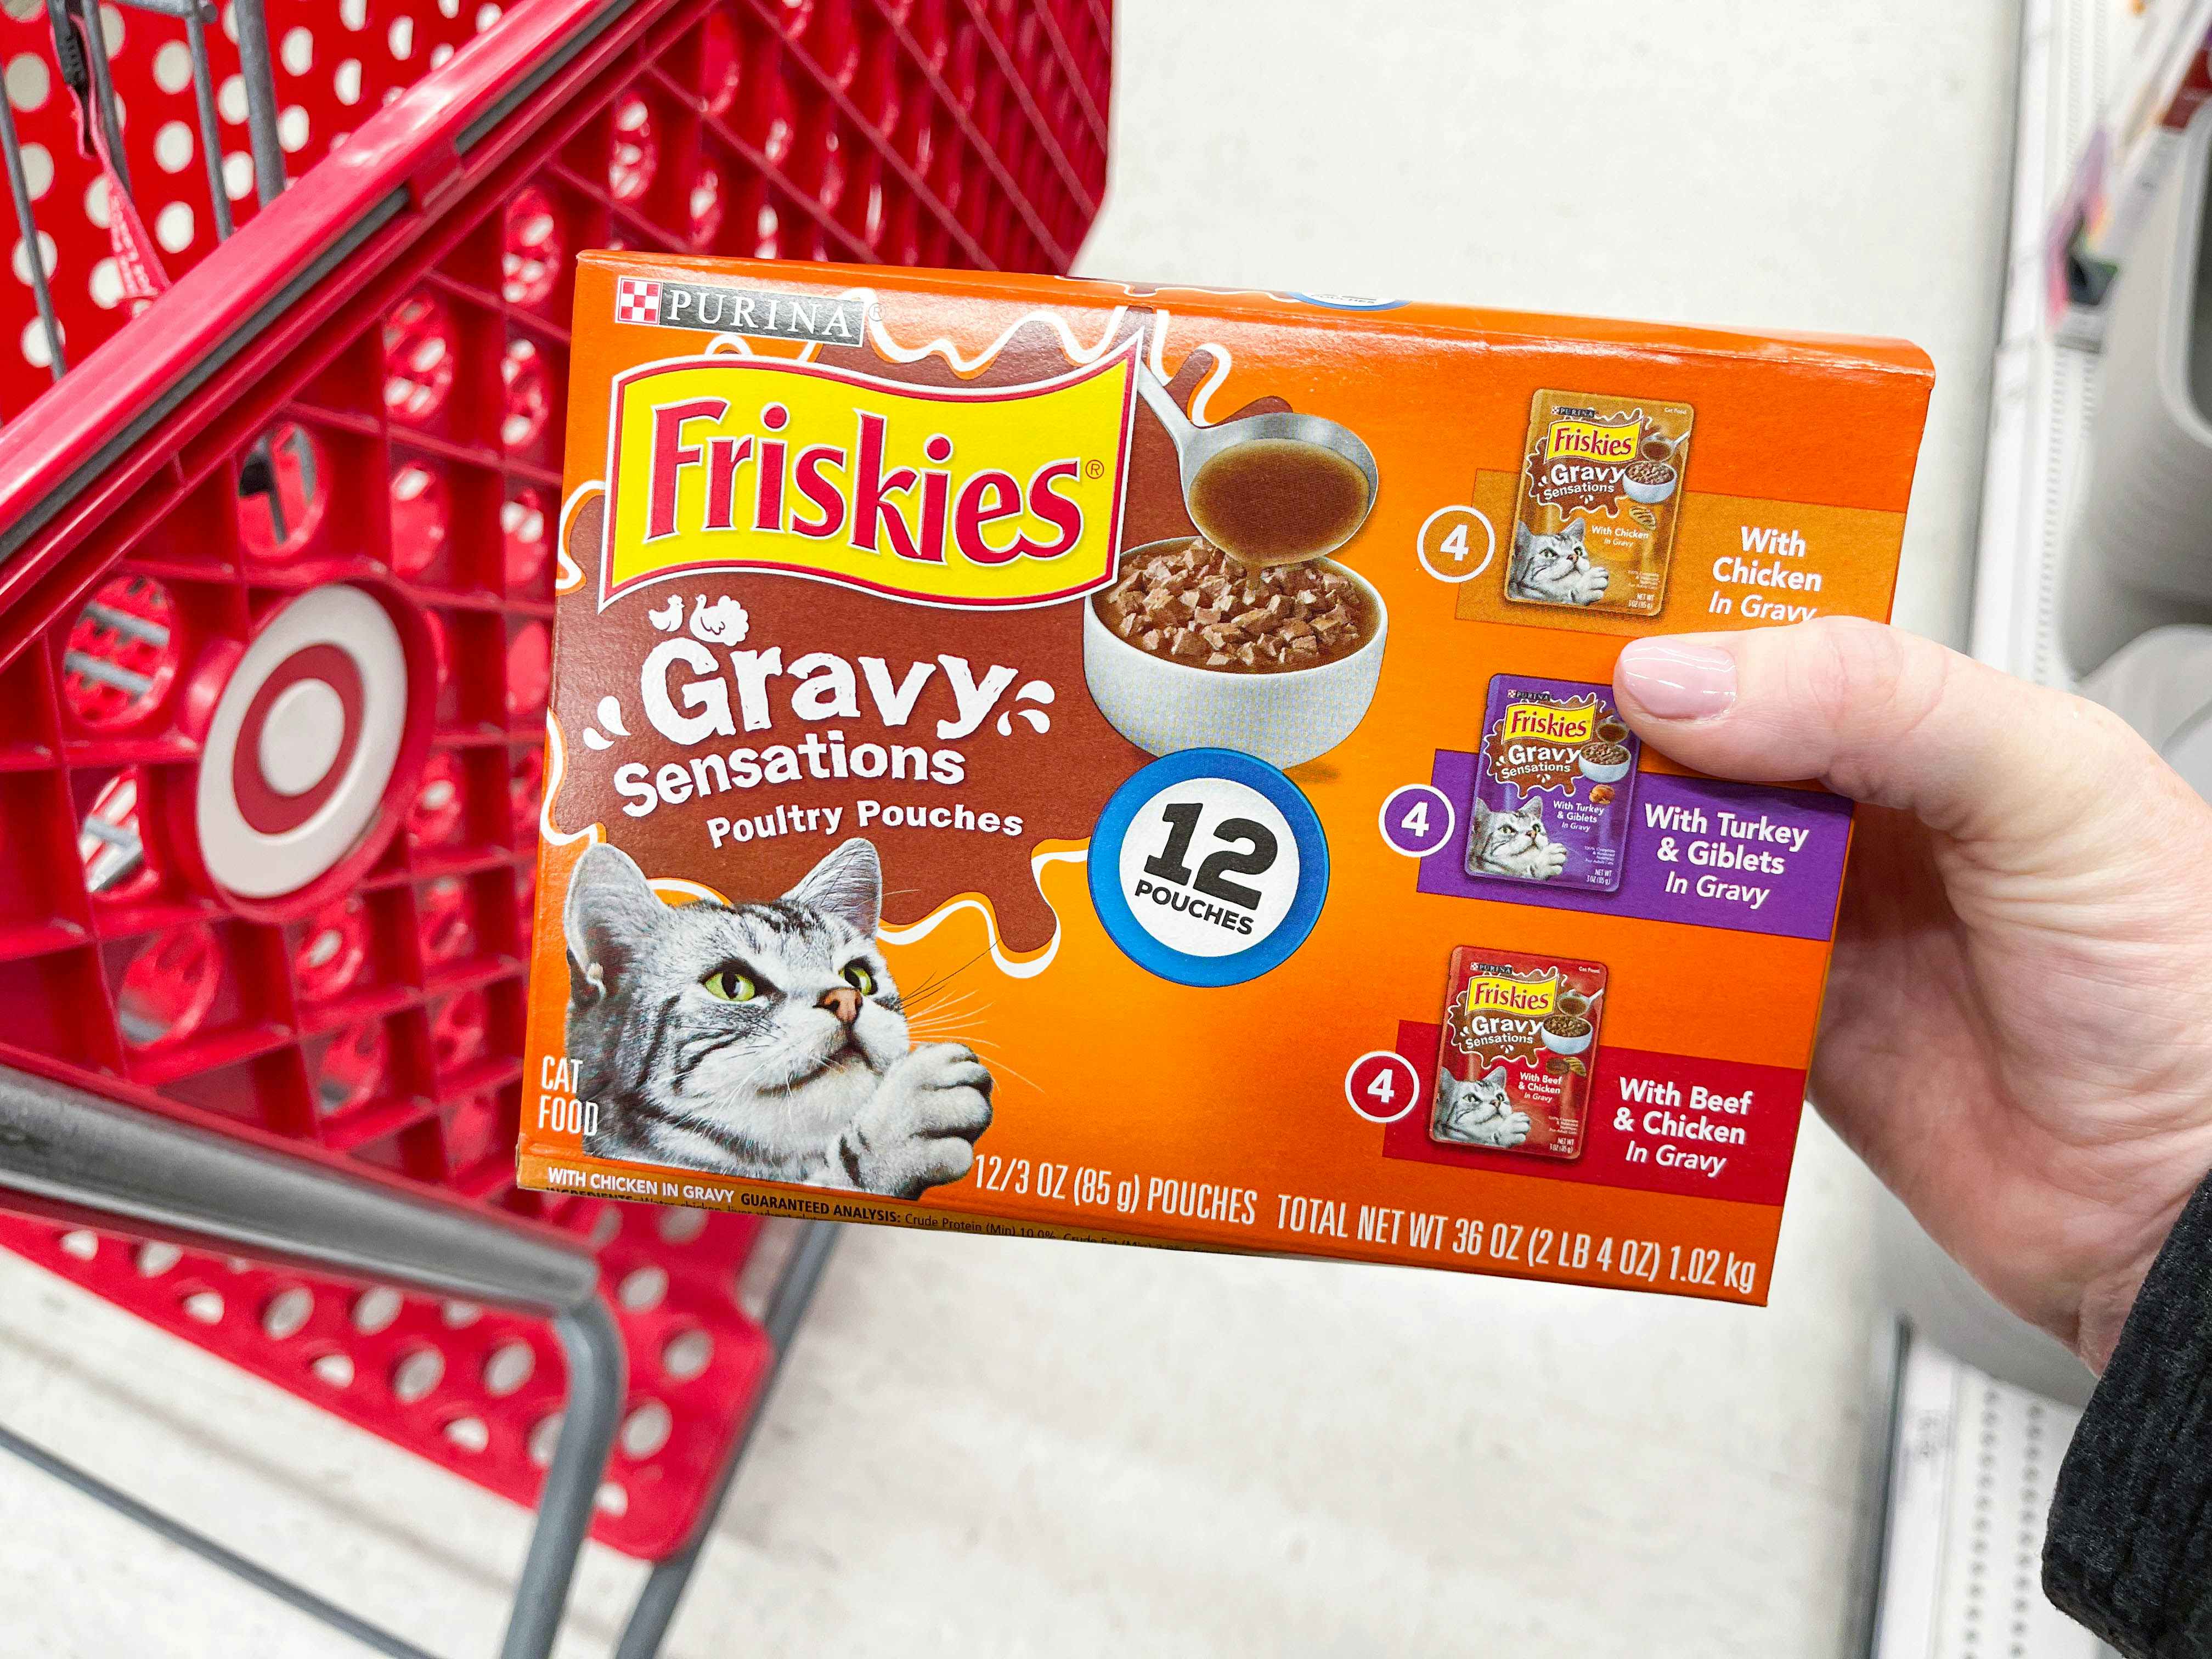 a box of Friskies wet cat food being held in front of target cart